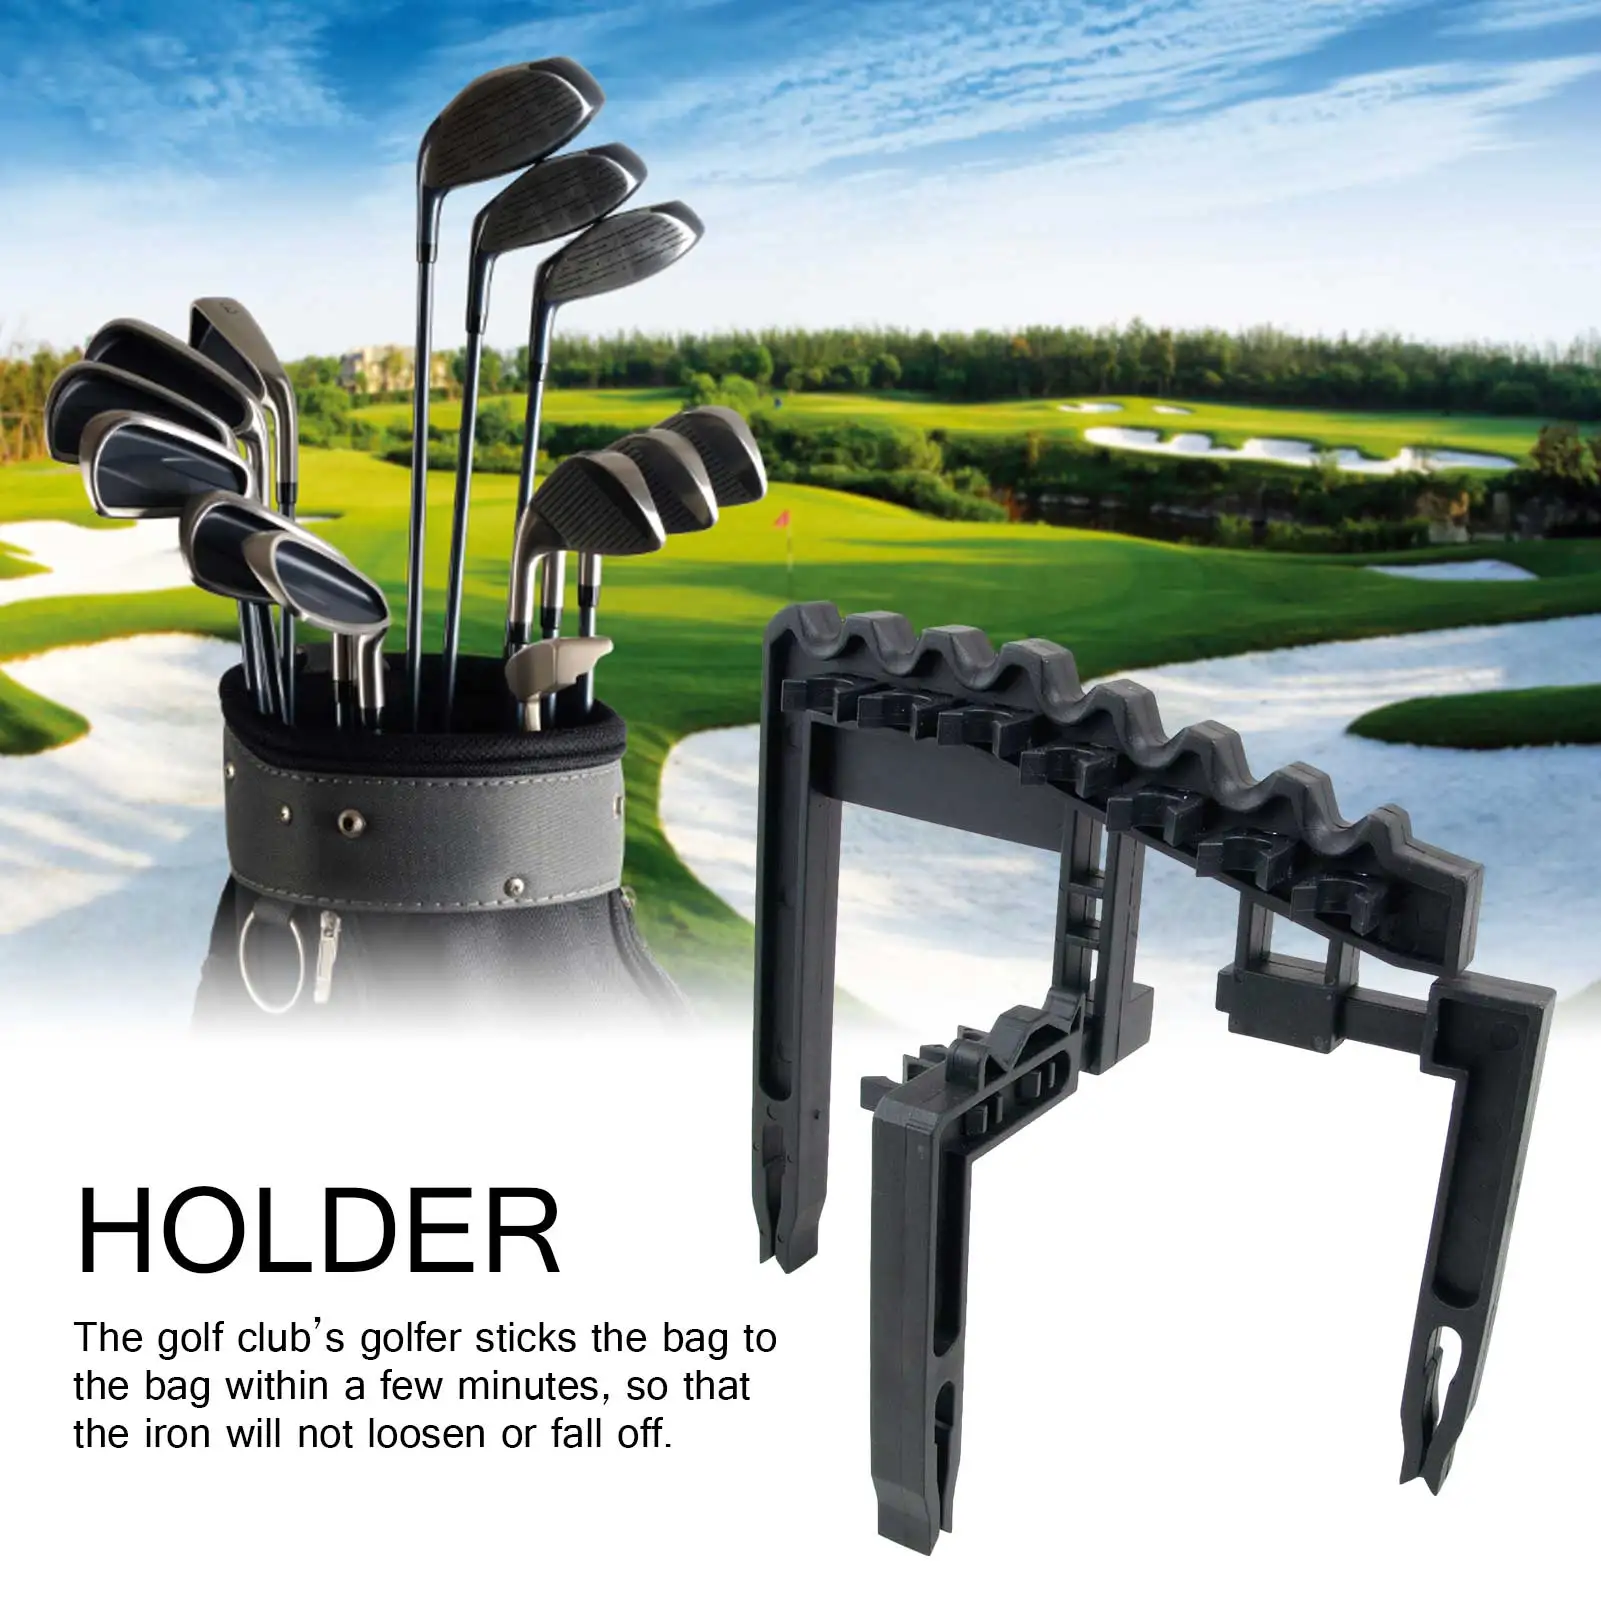 Durable Golf 9 Iron Club ABS Shafts Holder Stacker Fits Any Size Of Bags Holder Stand Organizer Golf Accessories